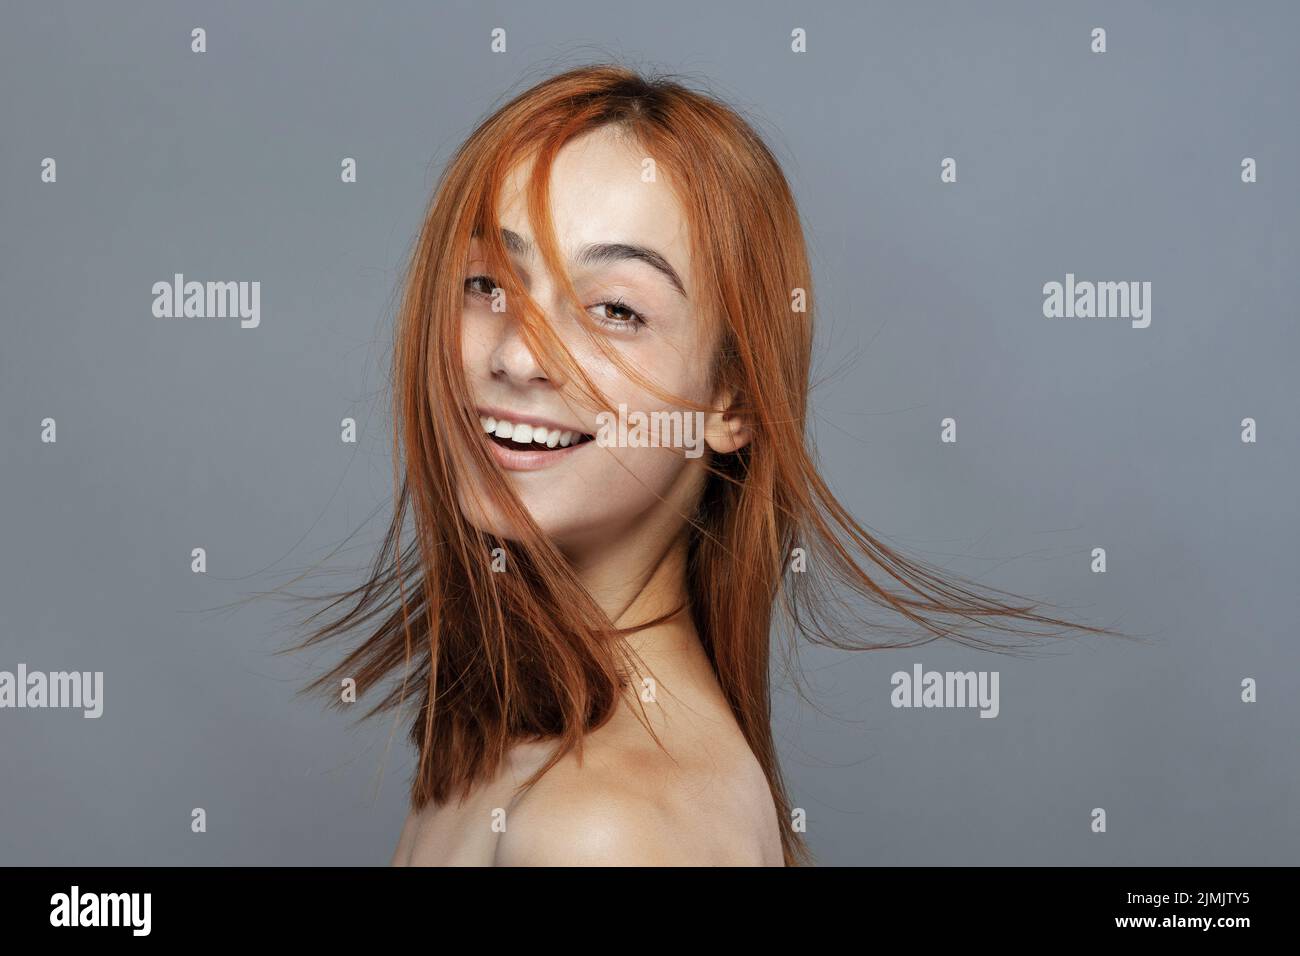 Beautiful dark burnt orange windy hair girl smiling. Studio portrait with happy face expression against gray background. Stock Photo